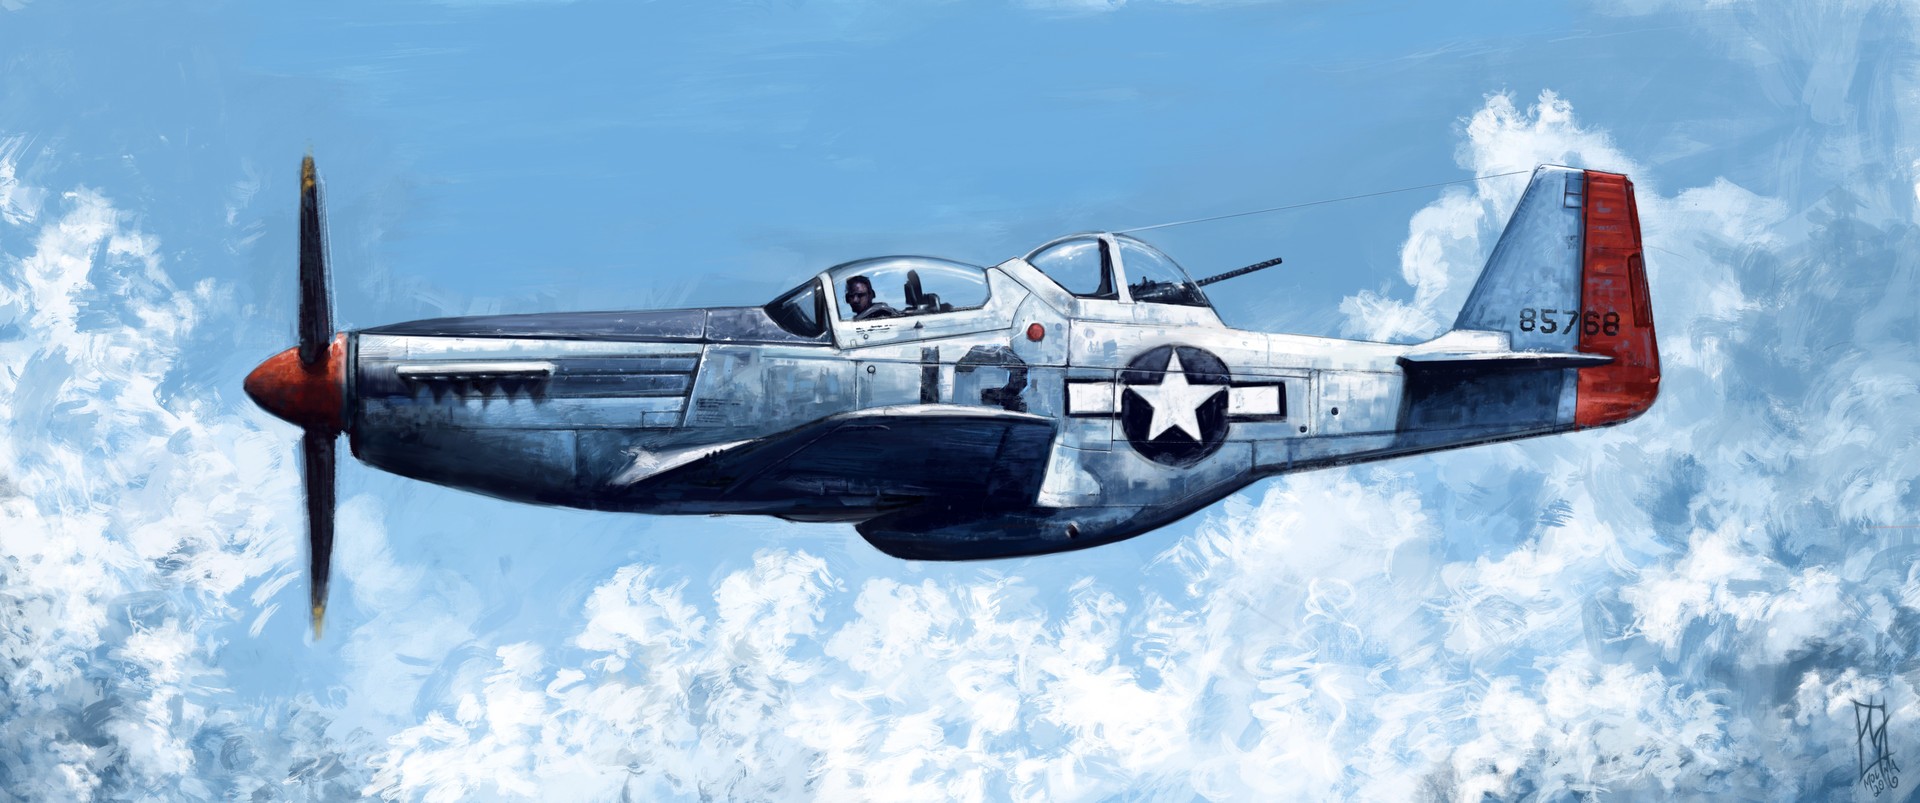 General 1920x803 North American P-51 Mustang vehicle military military aircraft airplane numbers artwork military vehicle aircraft North American Aviation sky American aircraft side view clouds pilot flying men signature